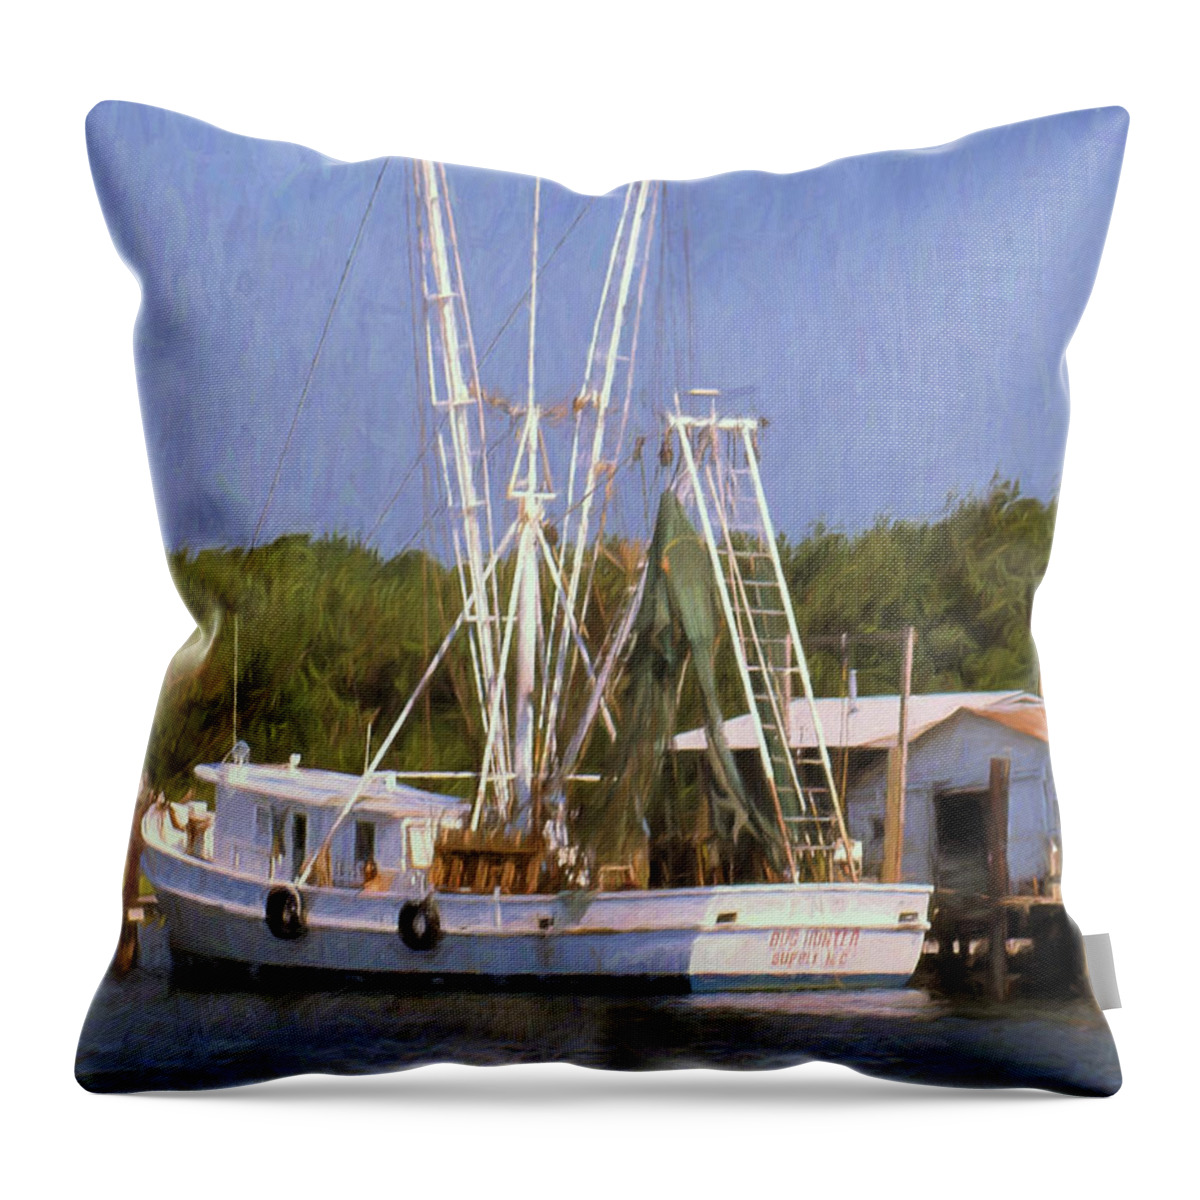 Dock Side Throw Pillow featuring the digital art Dock Side by Richard Rizzo